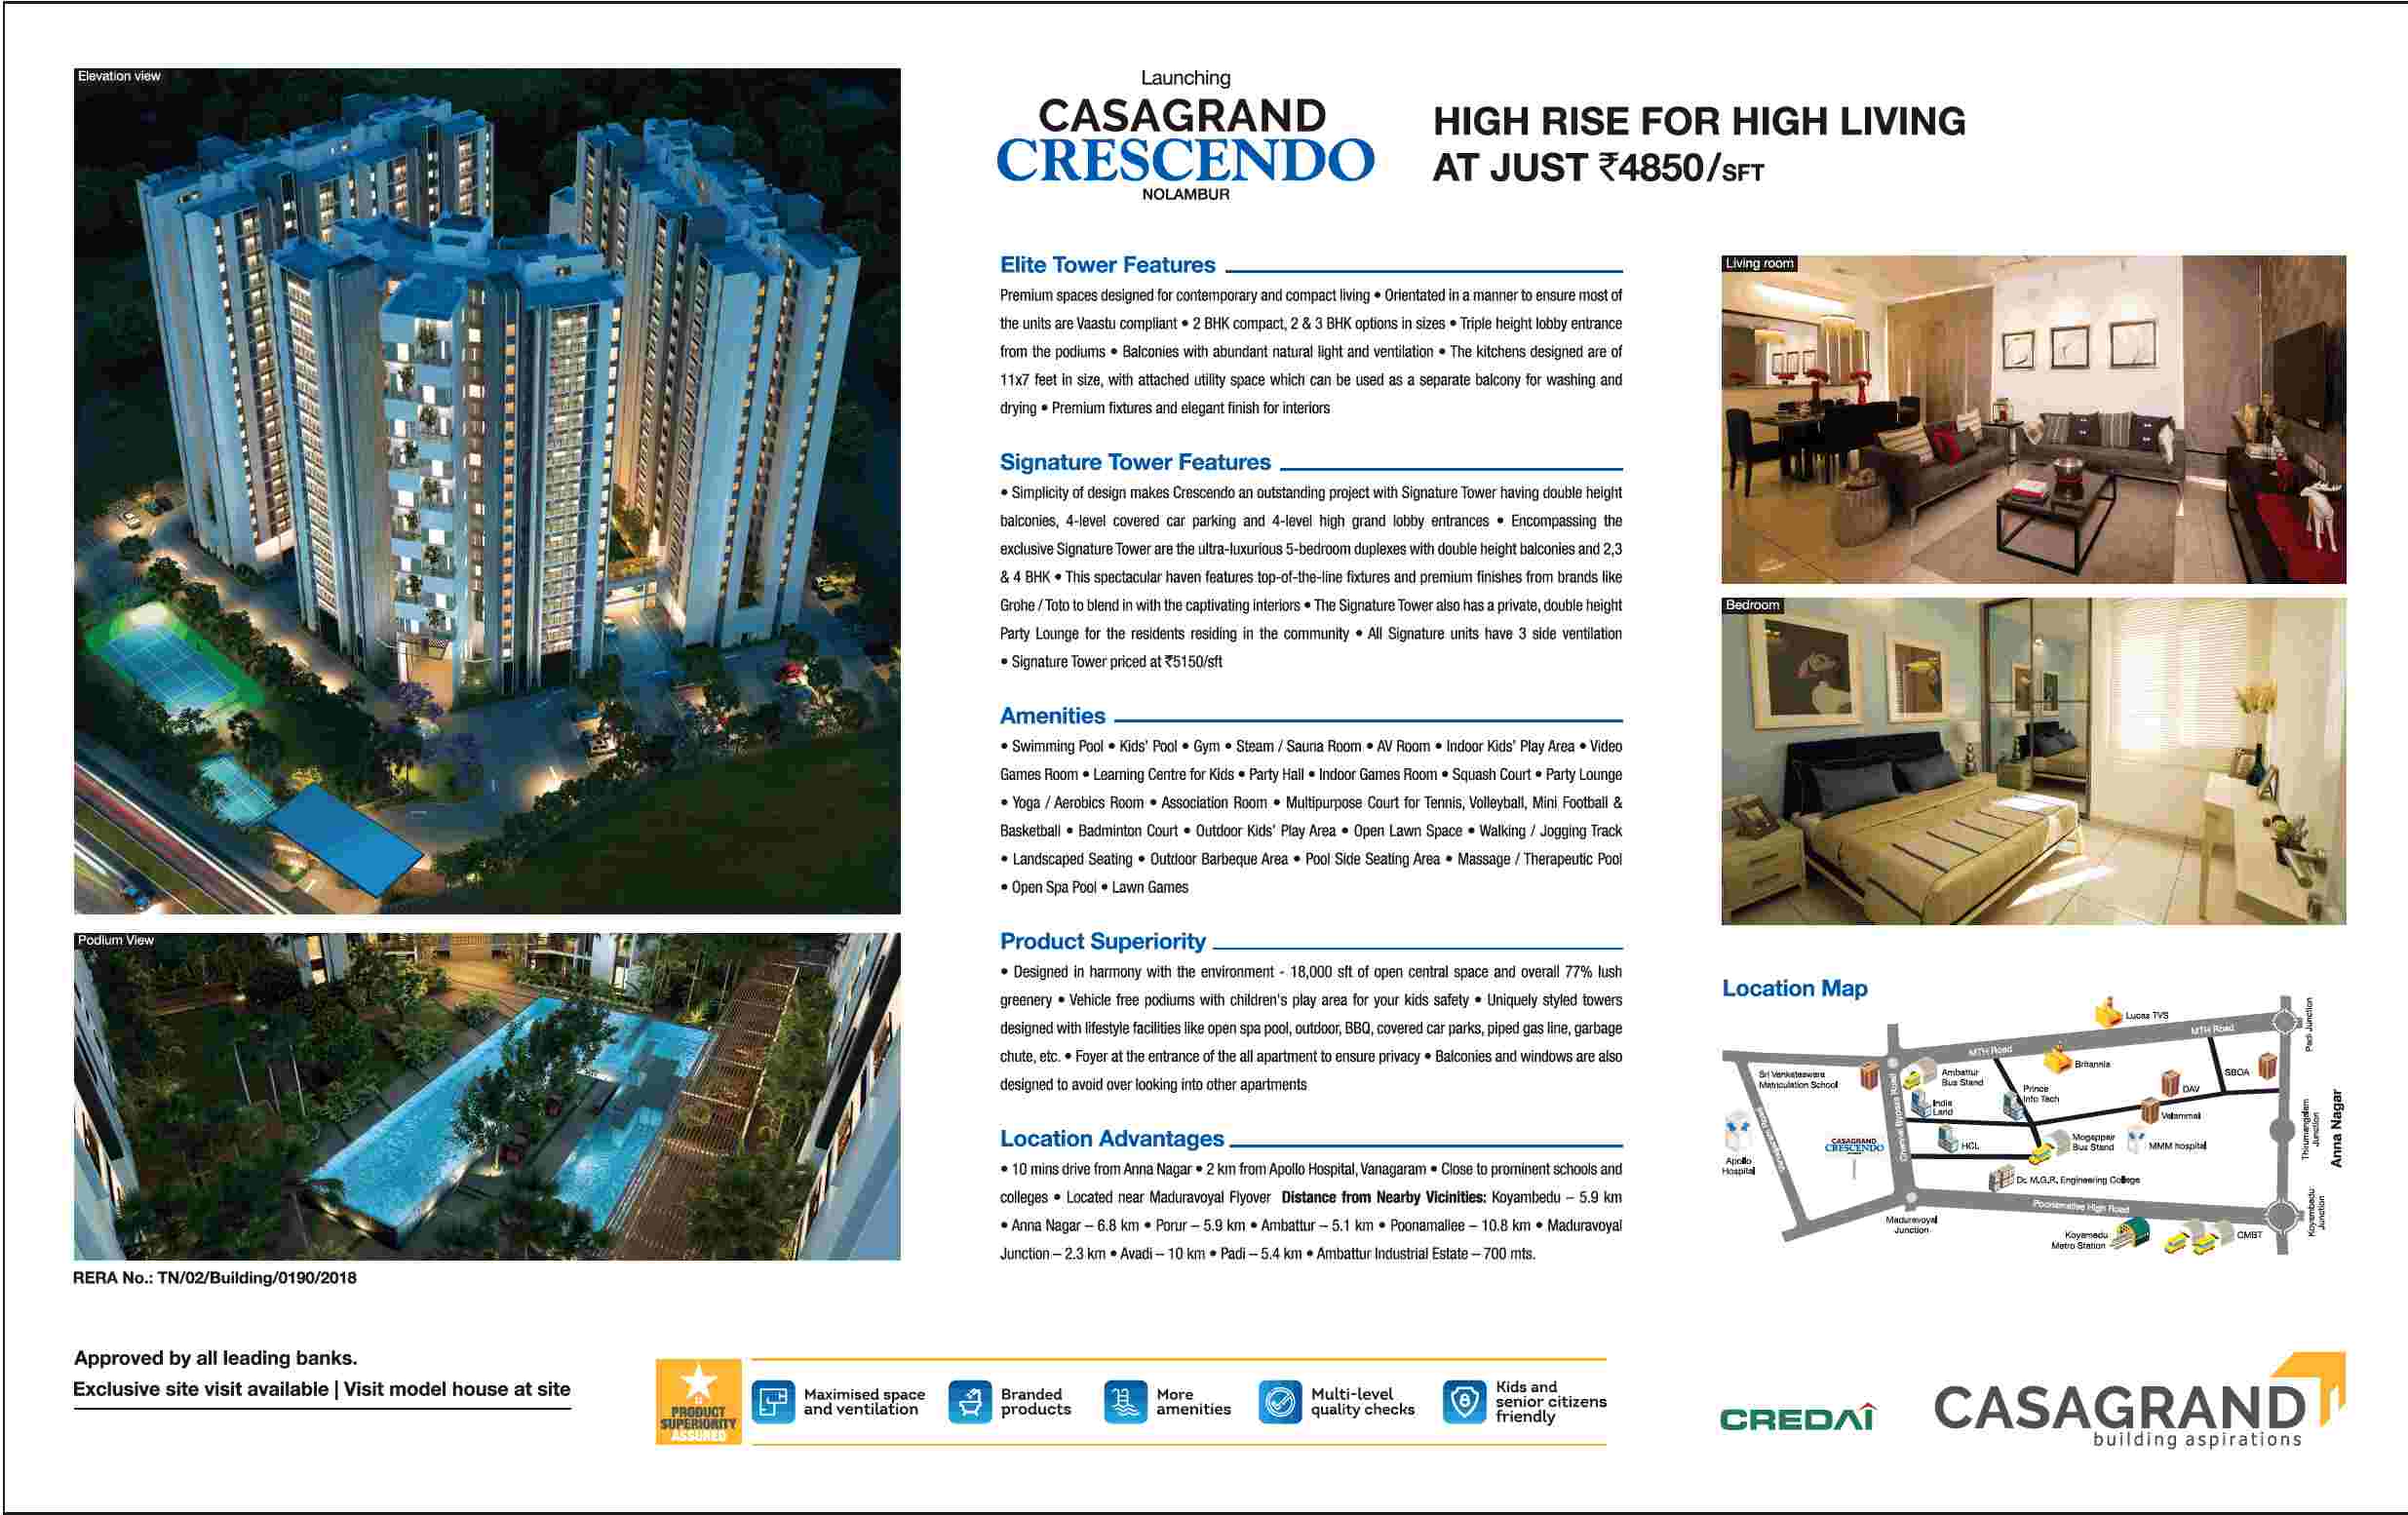 High rise for high living at just Rs. 4850 per sq.ft. at Casagrand Crescendo in Chennai